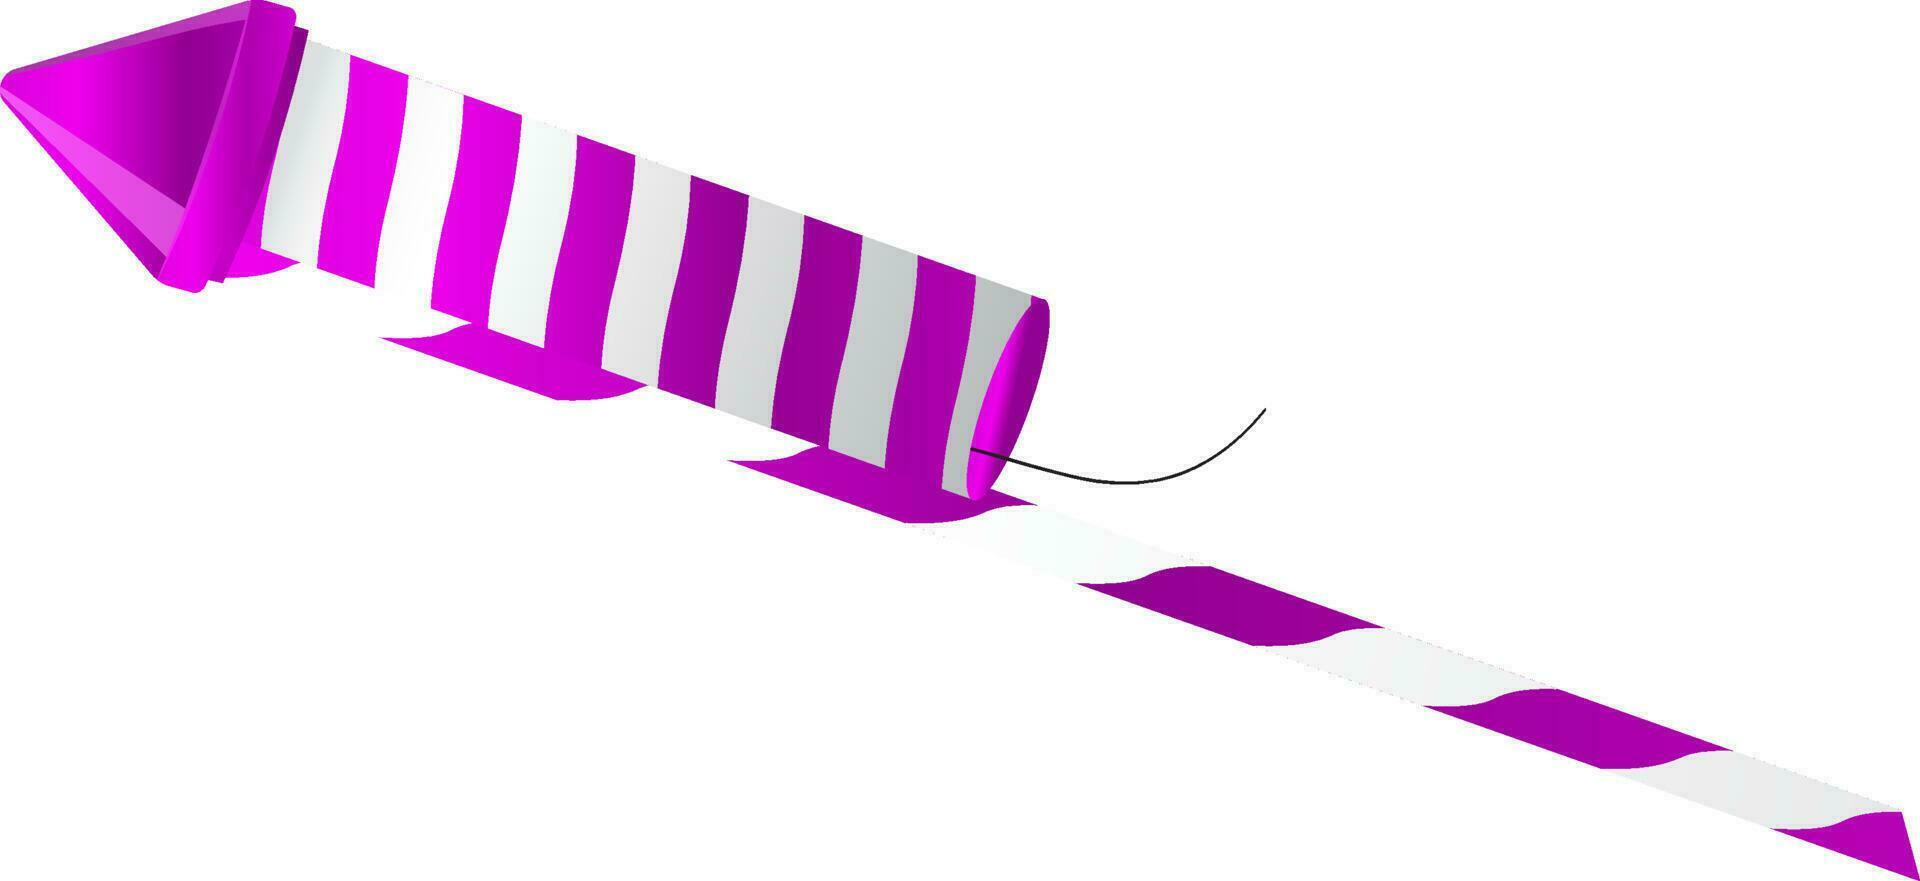 Shiny fireworks rocket in purple and white color. vector